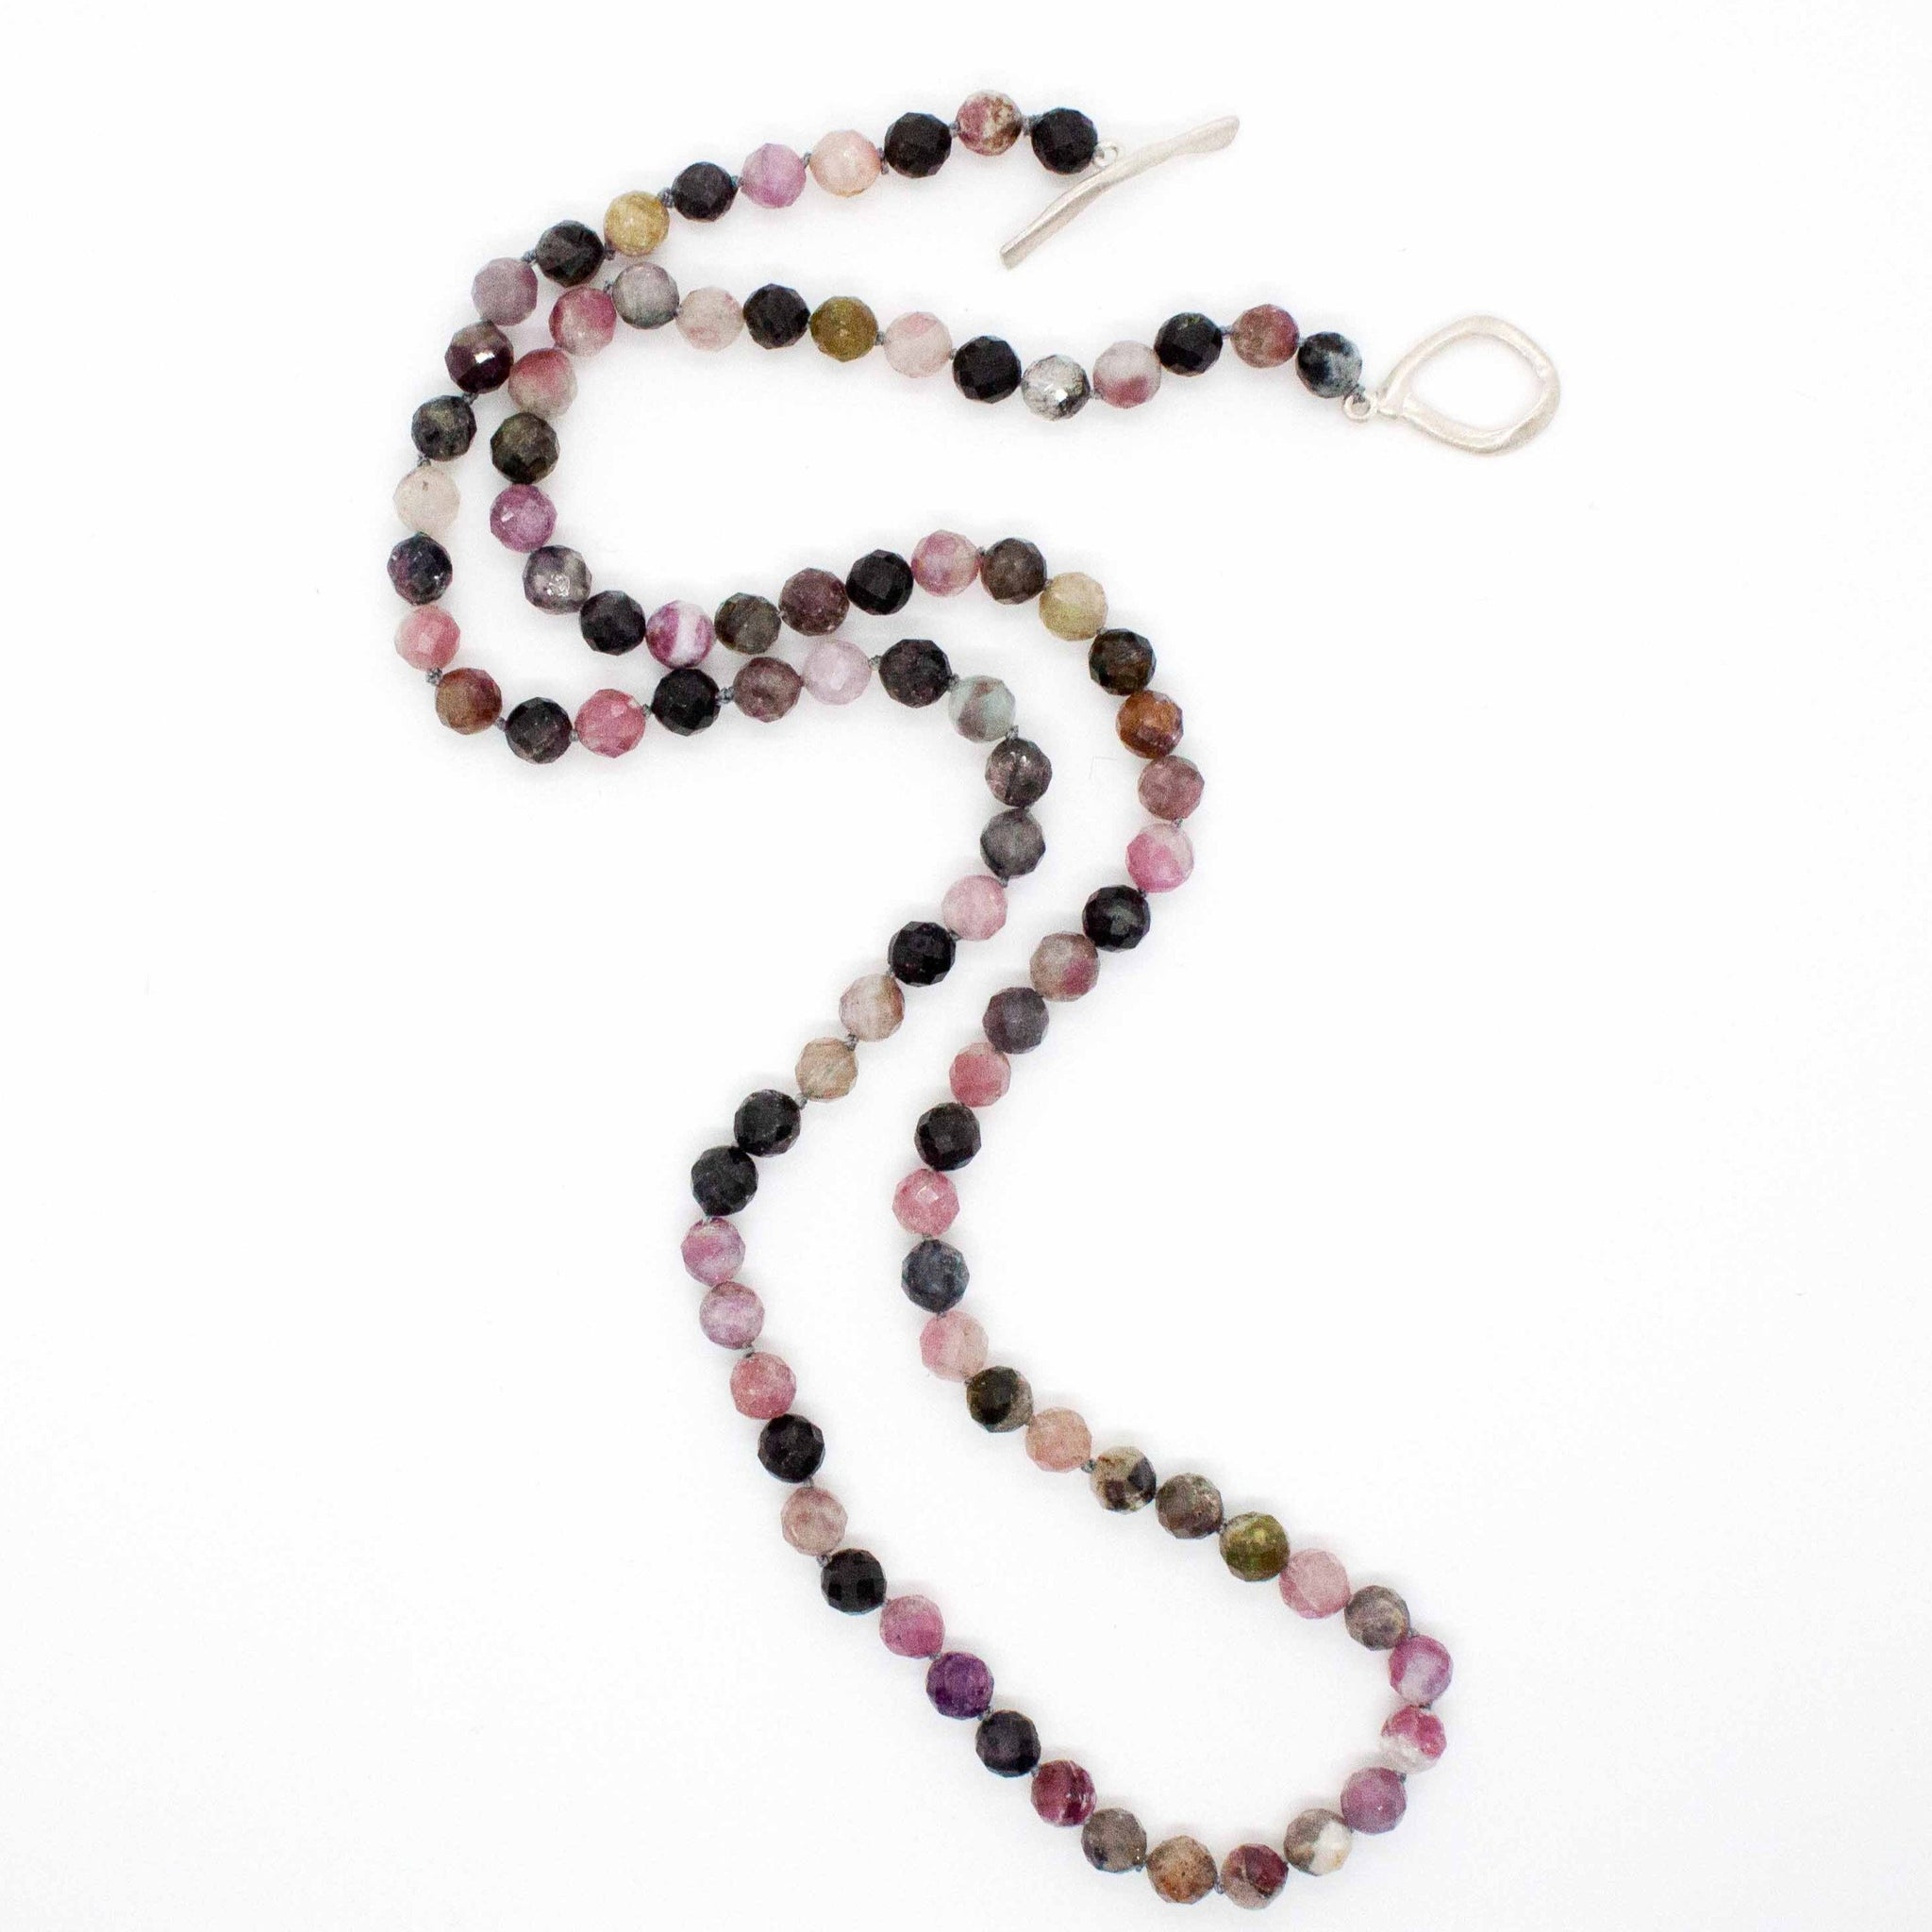 A colourful, one-of-a-kind necklace that sits at the perfect length for t-shirts, v-necks or open-neck blouses. For any season, this rainbow tourmaline necklace is an eye-catching addition piece that you'll wear again and again. one-of-a-kind 26" hand knotted rainbow tourmaline necklace with brushed sterling silver toggle clasp. Handmade in Toronto by kp jewelry co.